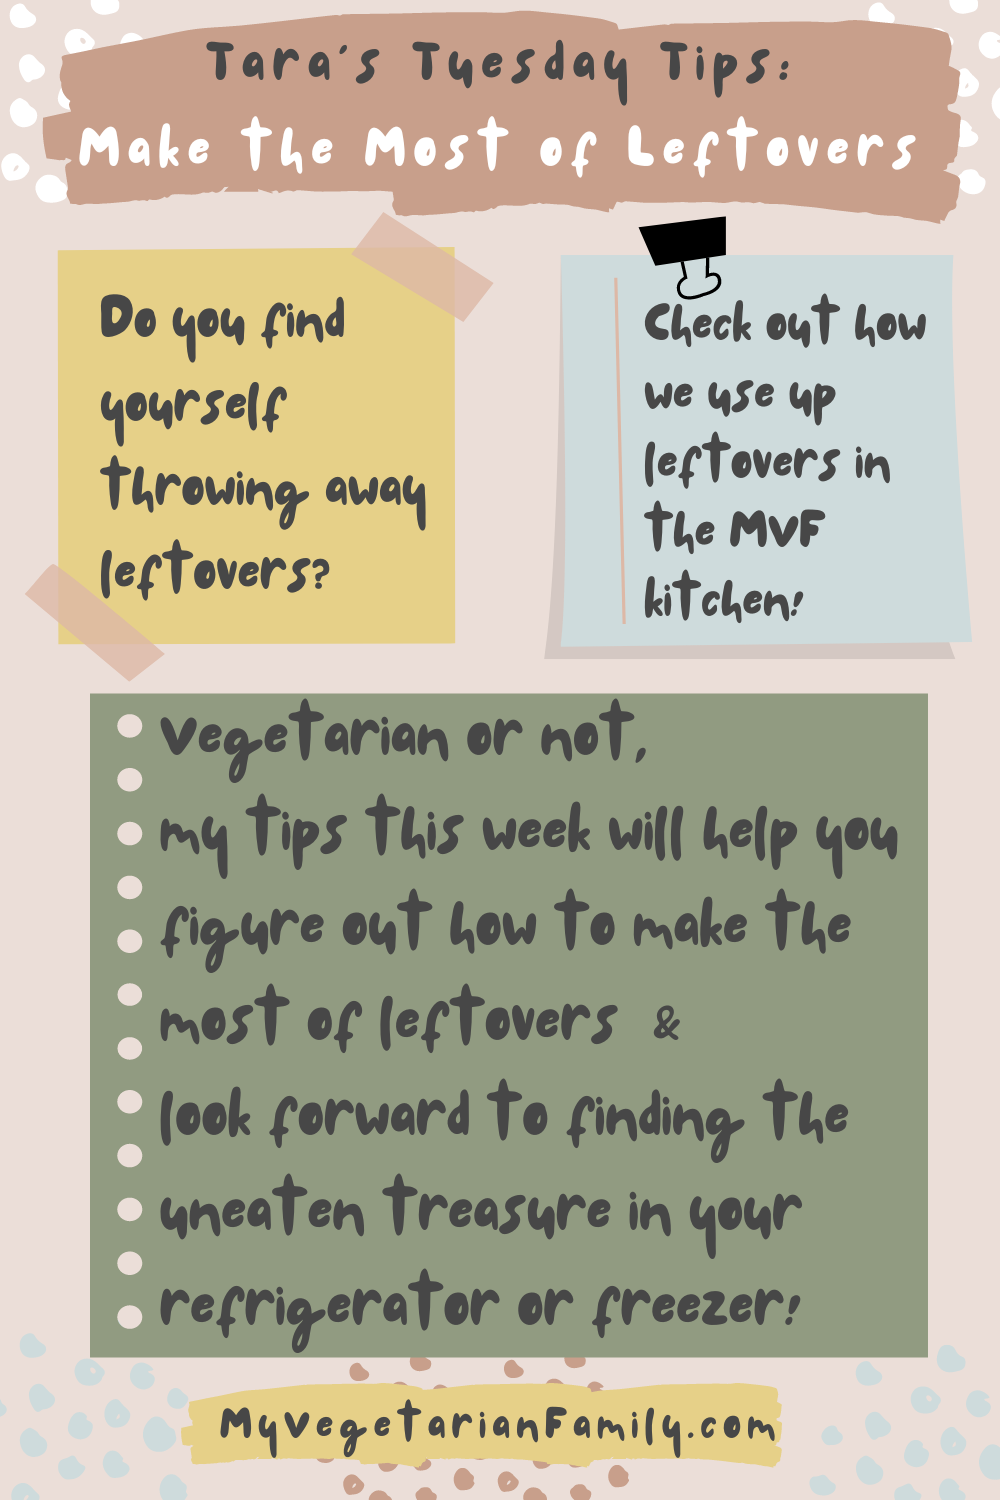 The Vegetarian's Guide to Making the Most of Leftovers | My Vegetarian Family | Tara's Tuesday Tips #learntoloveleftovers #tarastuesdaytips